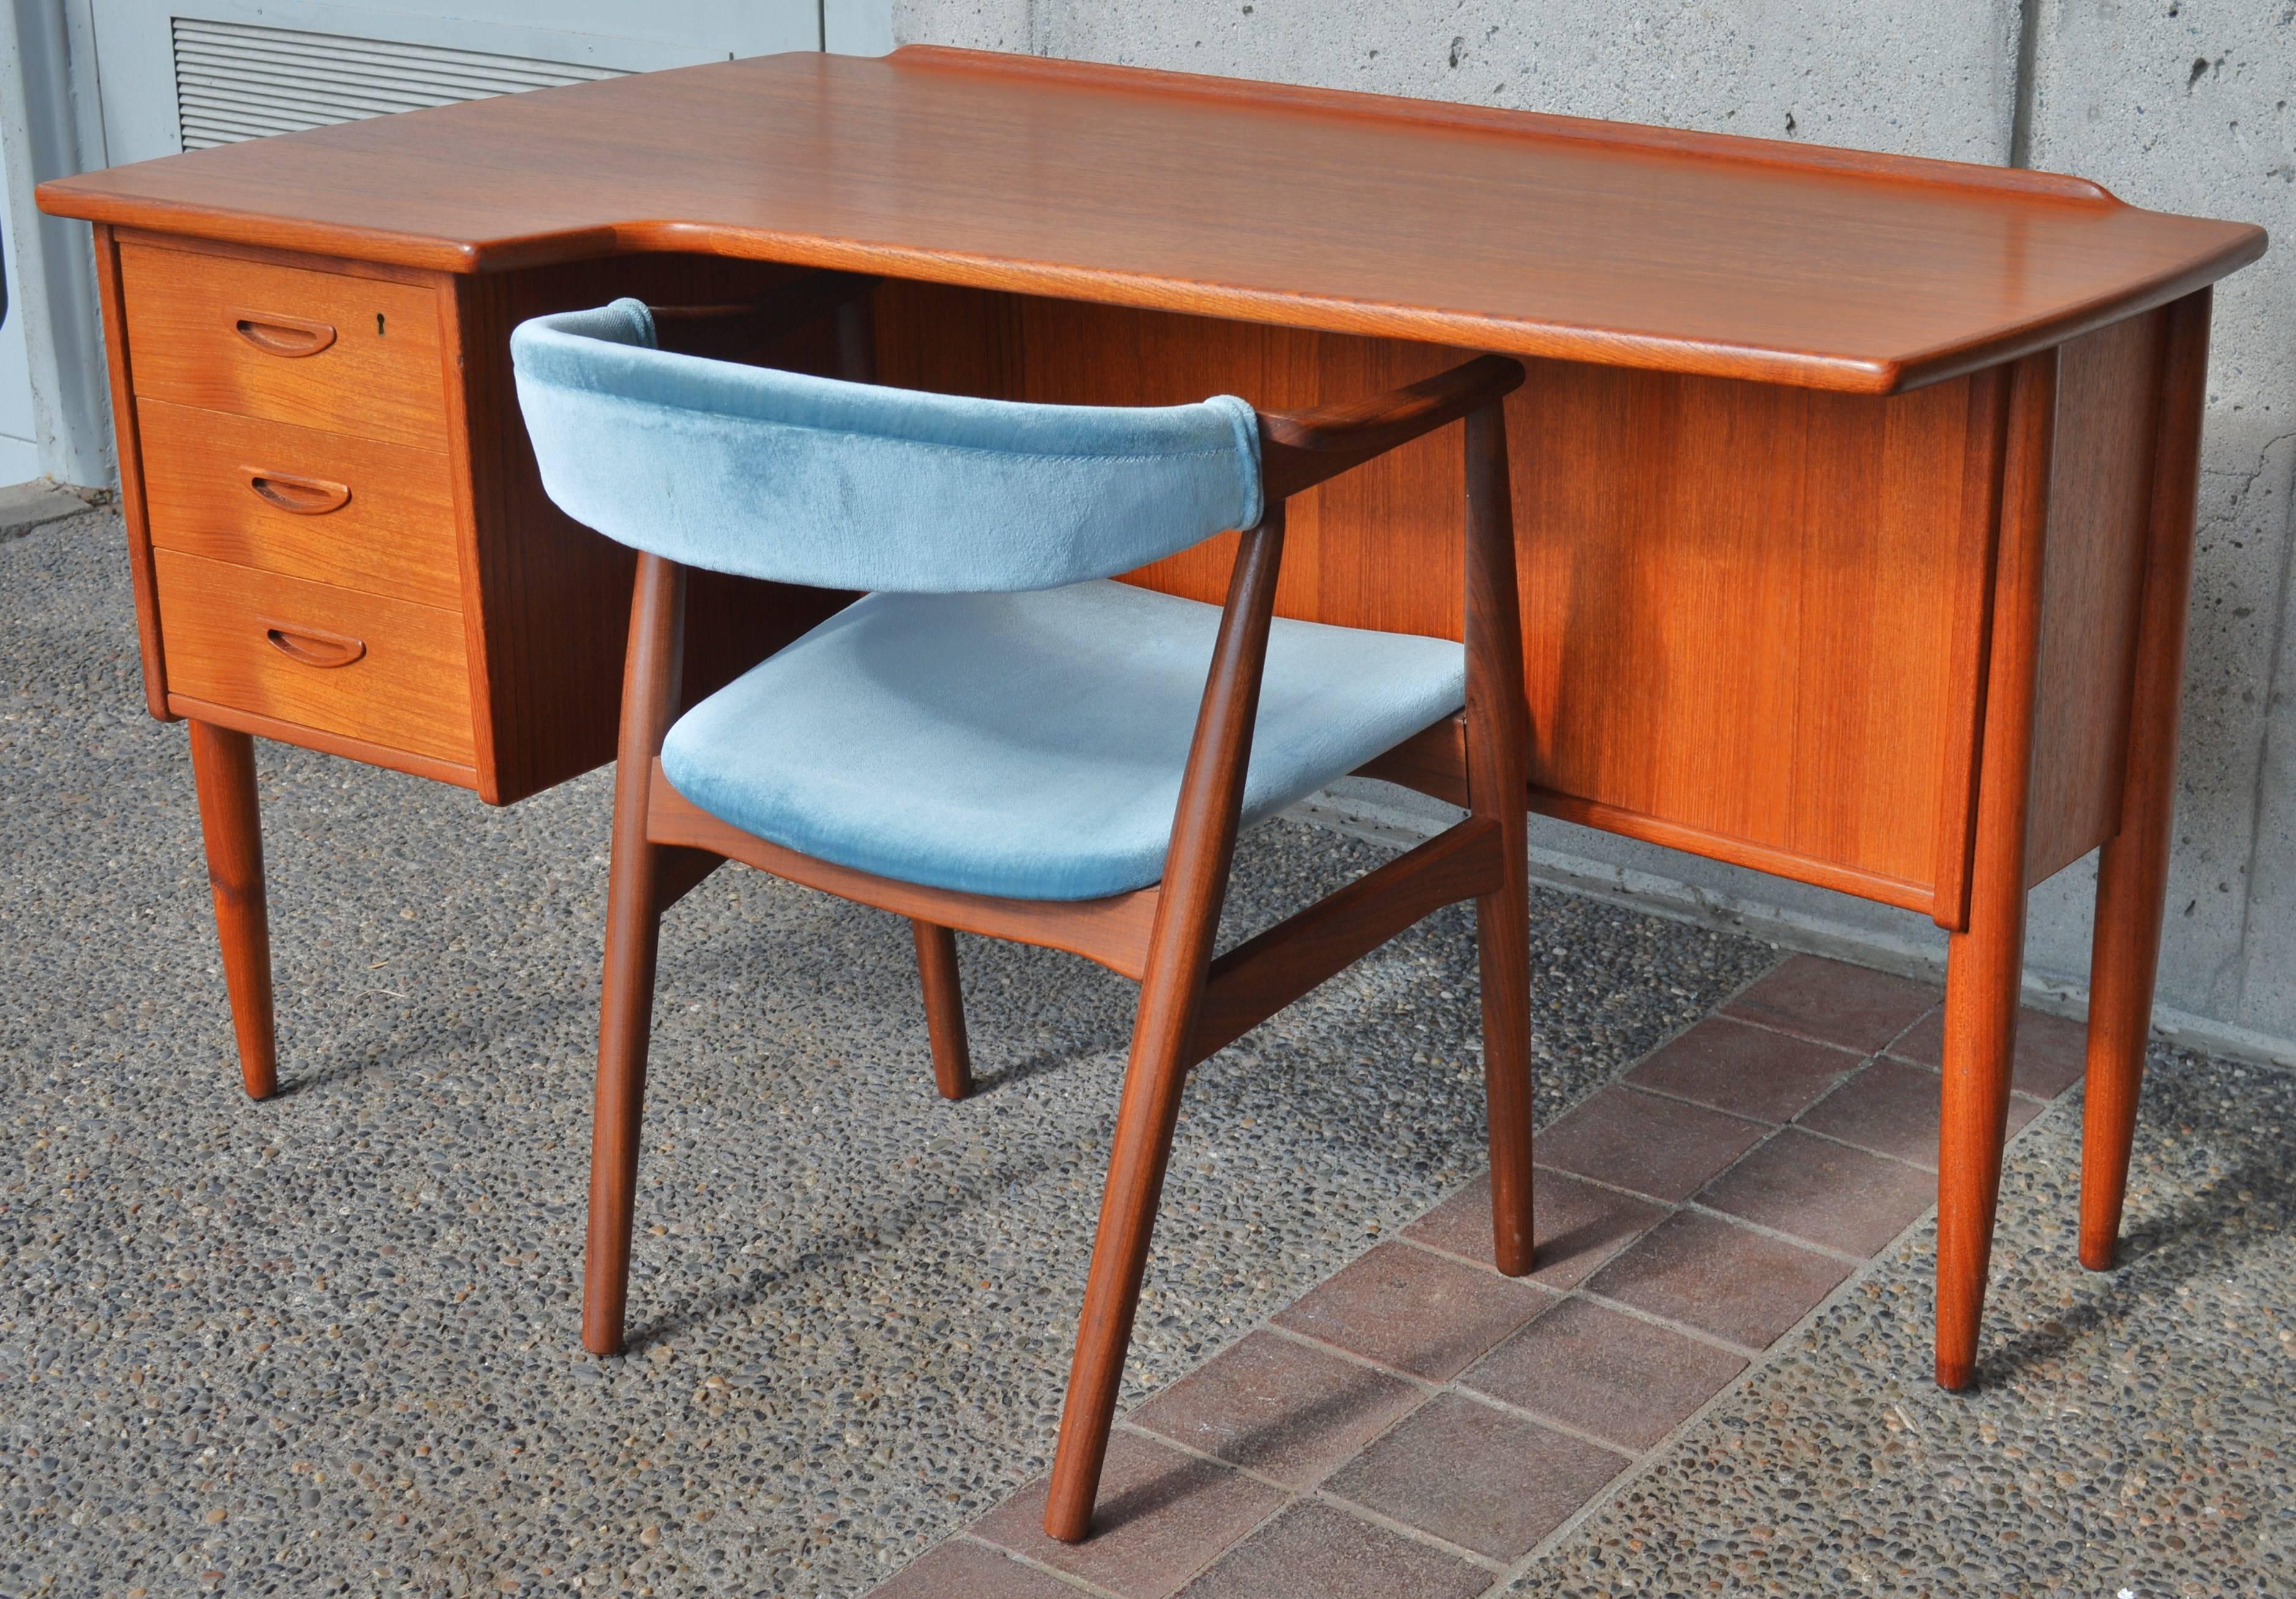 This impeccable and rare Danish modern teak desk is top quality with all hardwood construction and was designed by Goran Strand for Lelangs, Sweden. With the unique paisley shape, this desk provides plenty of work space while claiming a modest